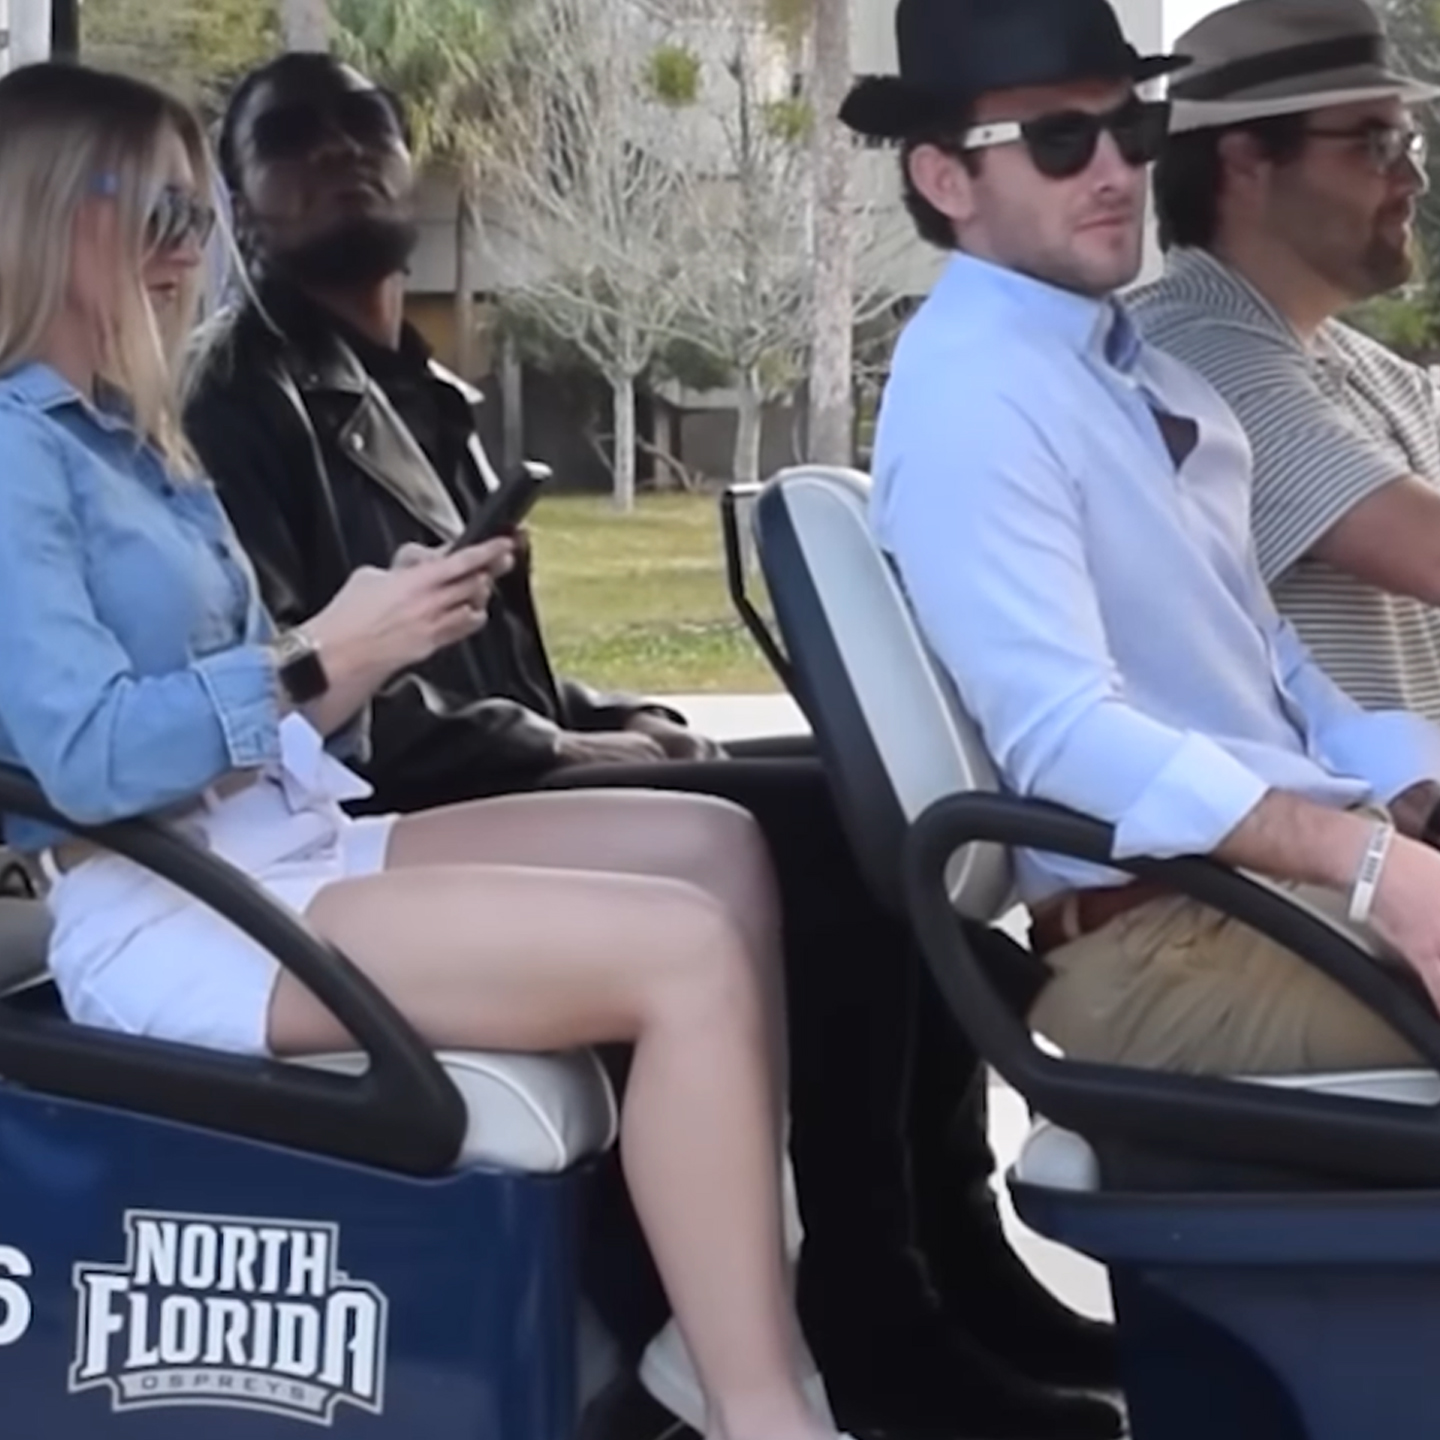 a group of people driving around in a golf cart